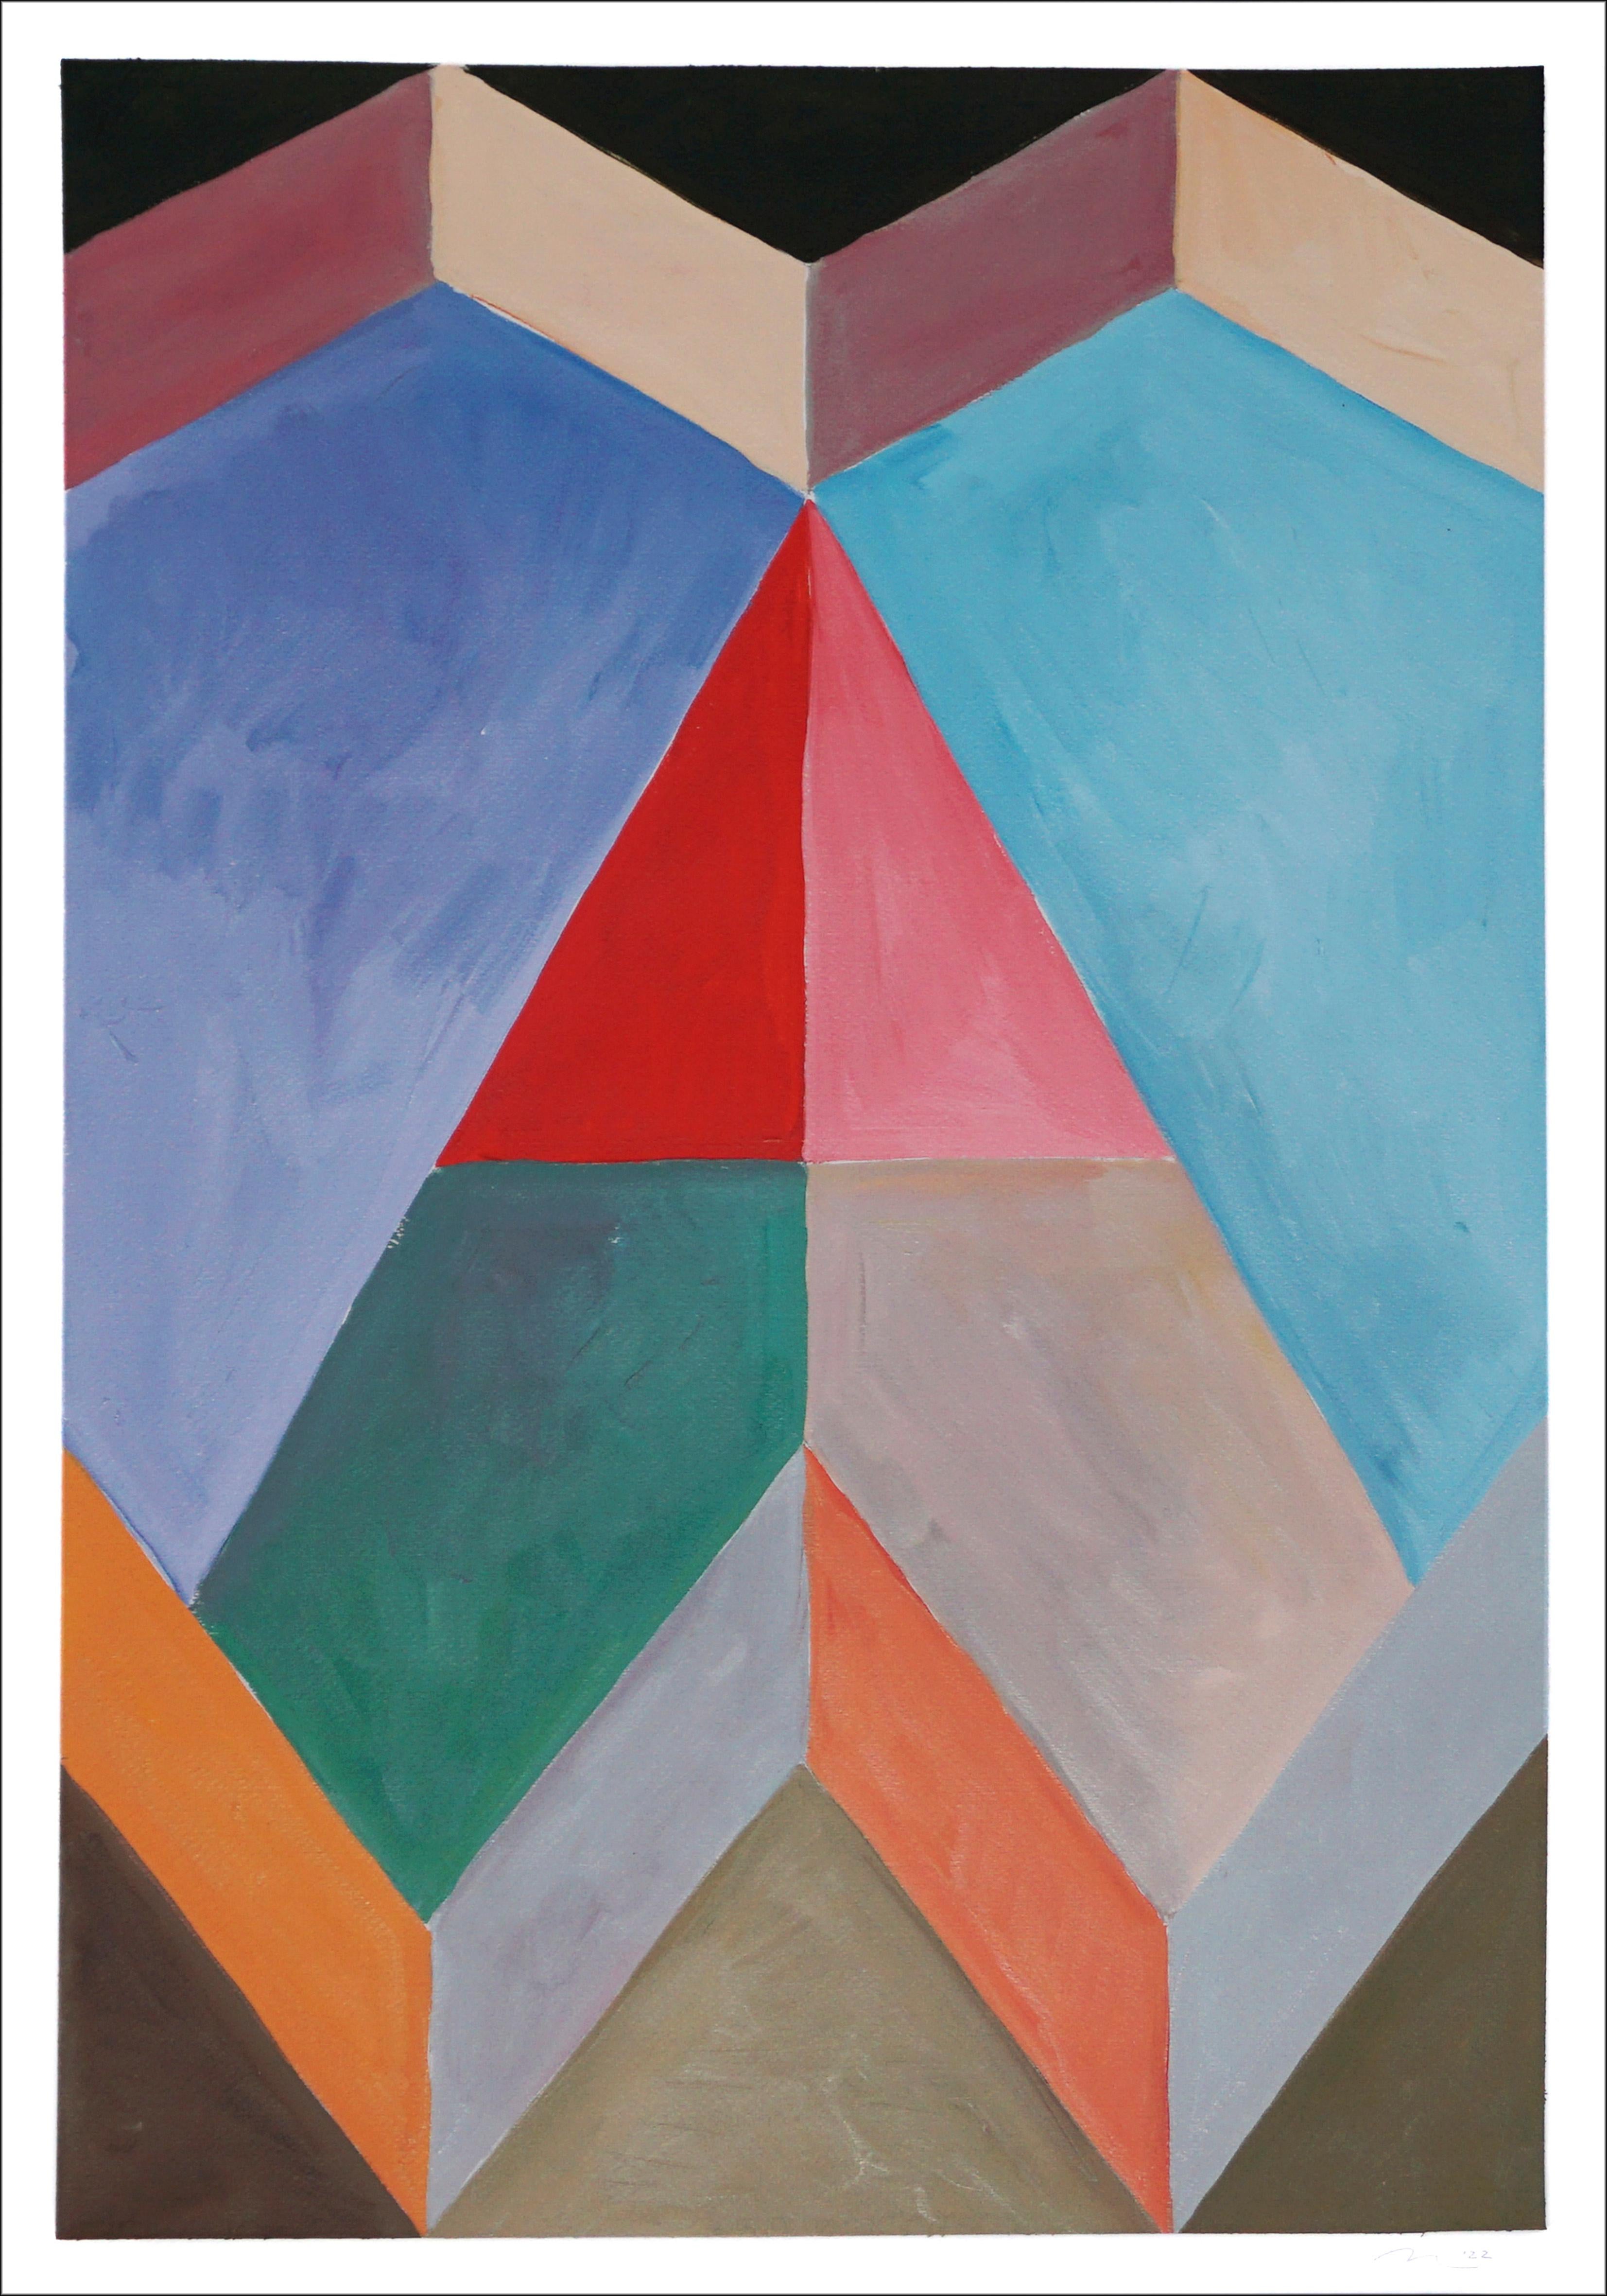 Mountaintop Pinnacle in Granate, Duo of Abstract Geometric Alpine Landscape Dune - Cubist Painting by Natalia Roman